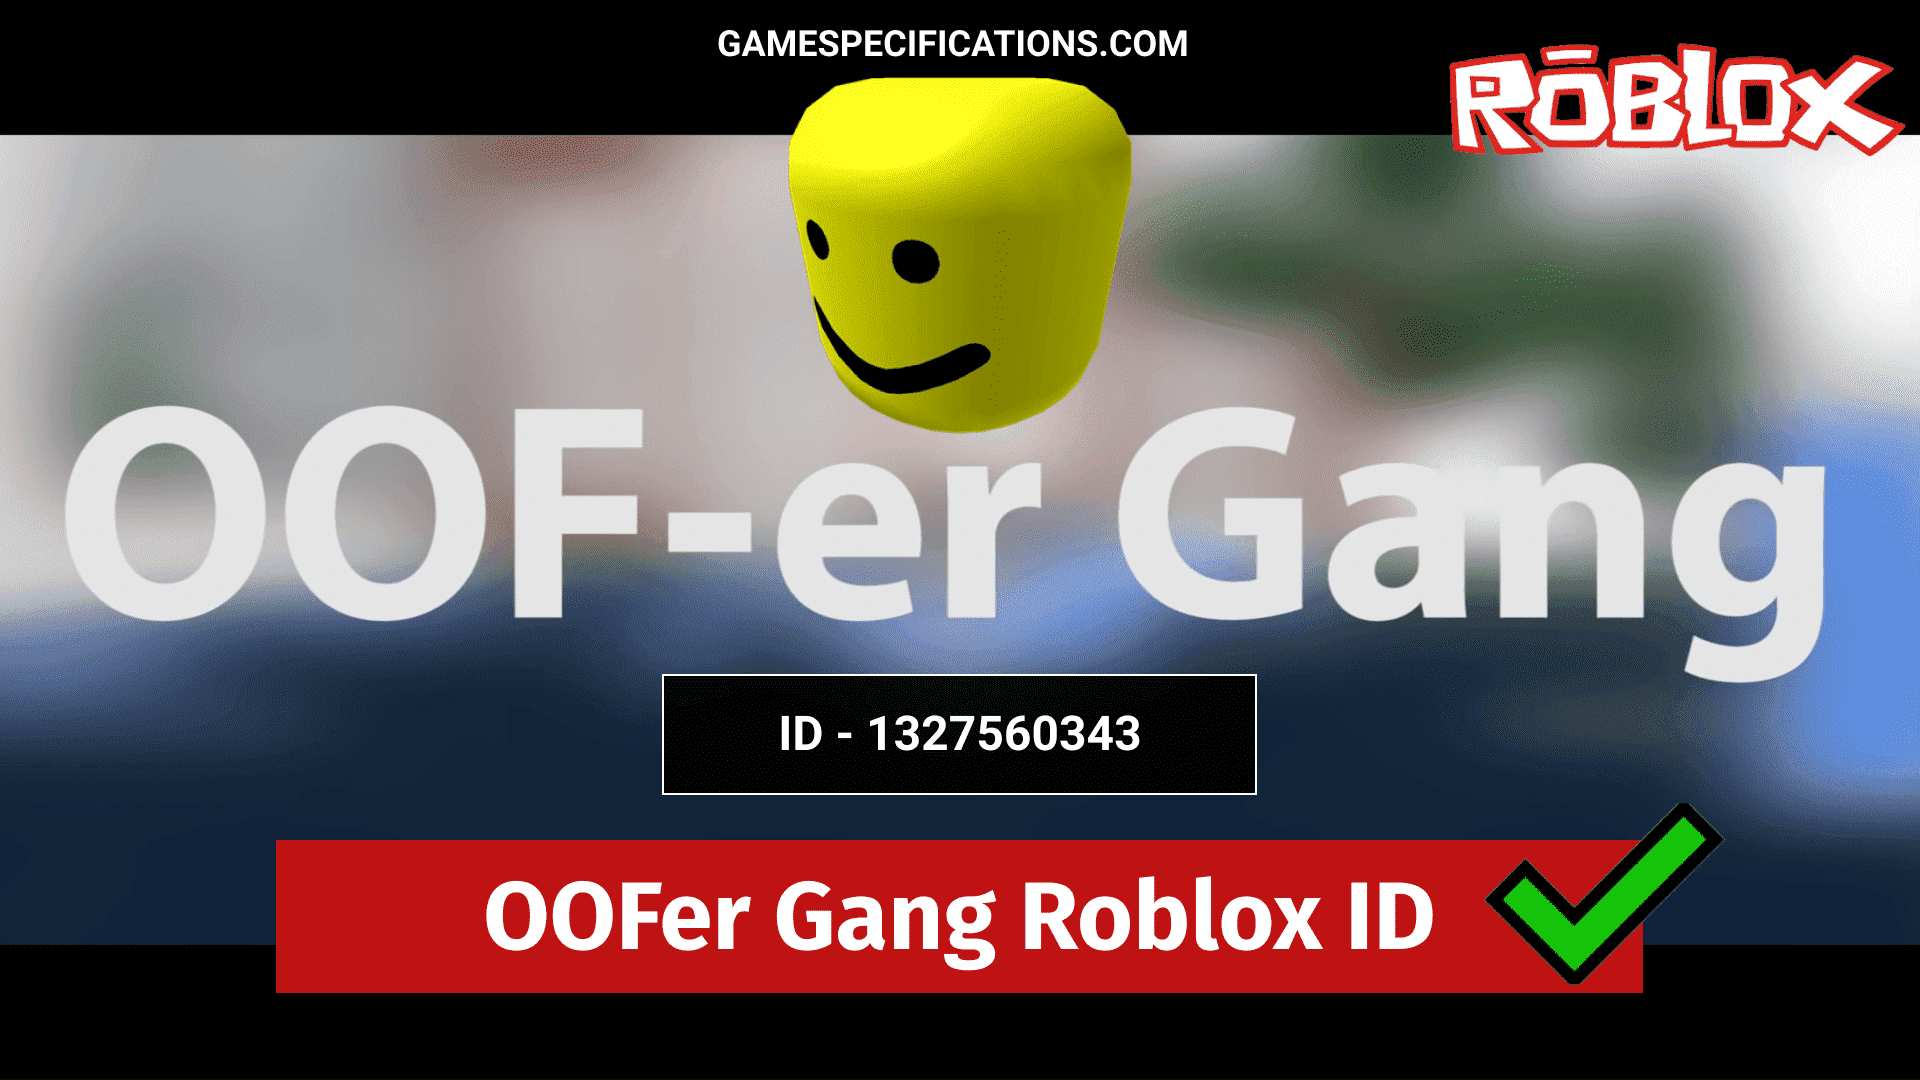 Oofer Gang Roblox Id Codes 2021 Game Specifications - roblox id screaming